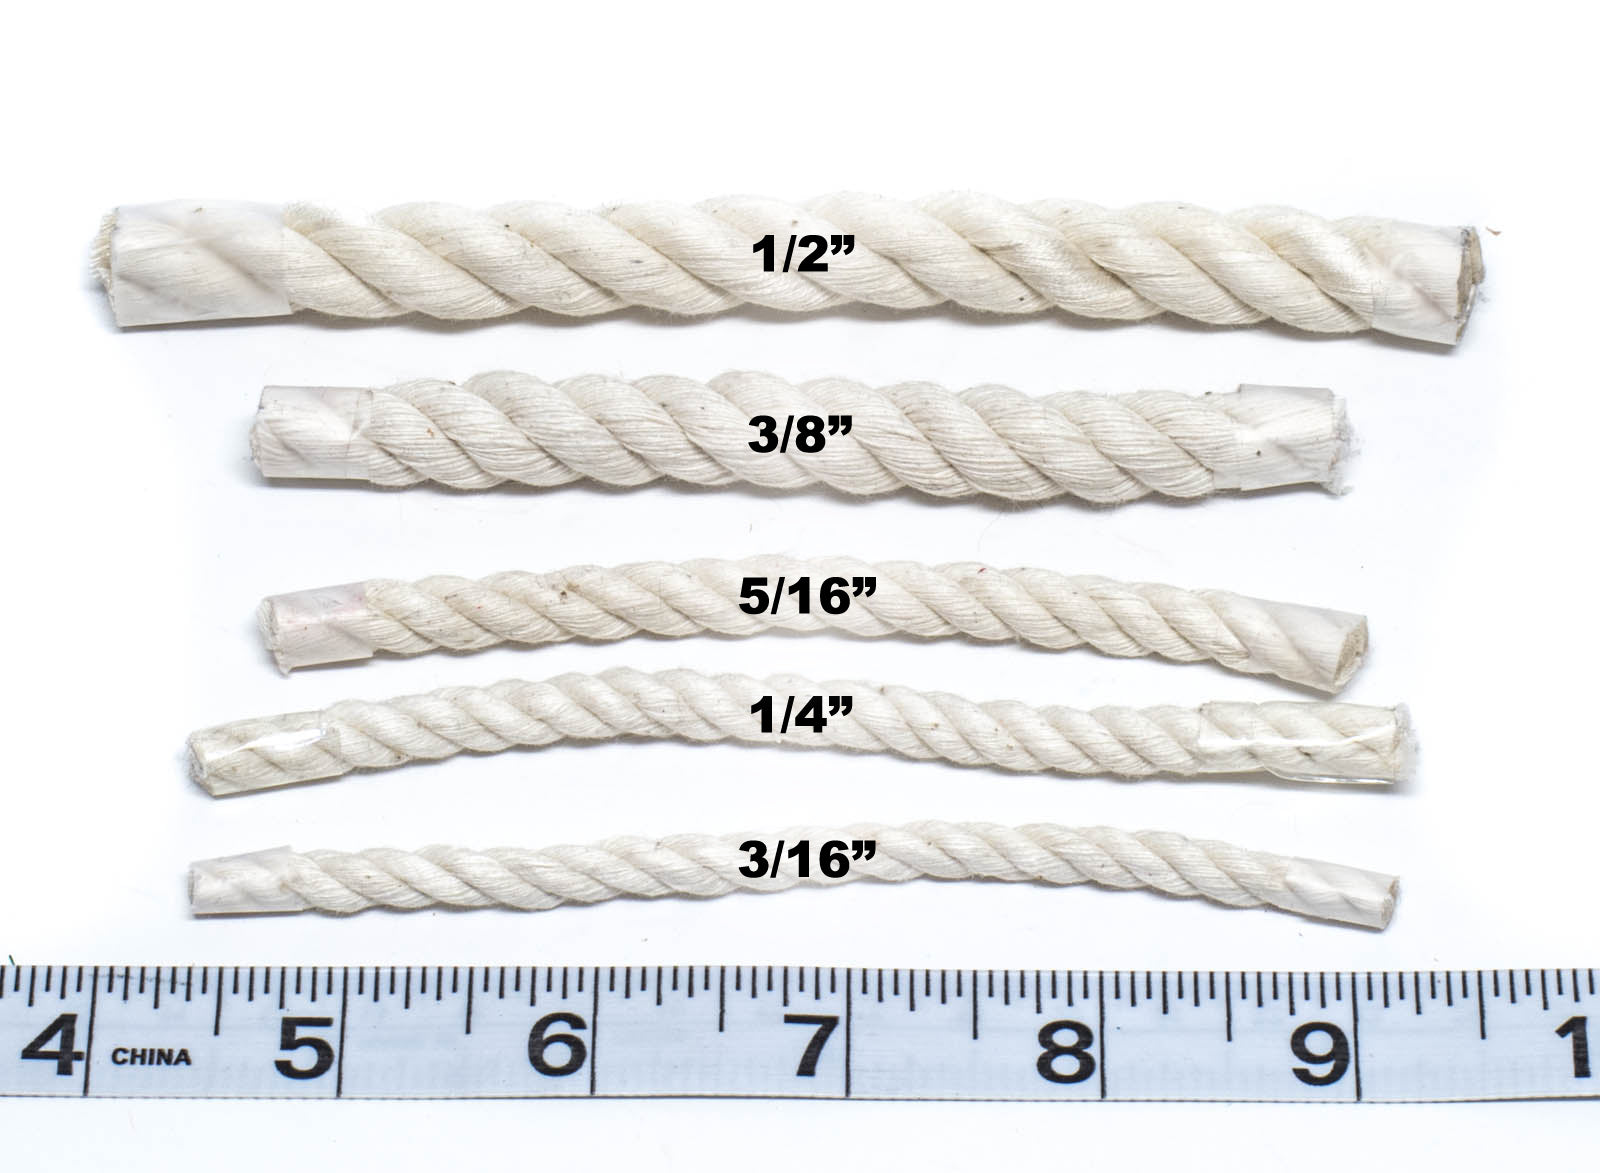 https://cdn.shopify.com/s/files/1/0517/2104/4134/products/cotton-rope-comparison-chart-2.jpg?v=1610004721&width=1600